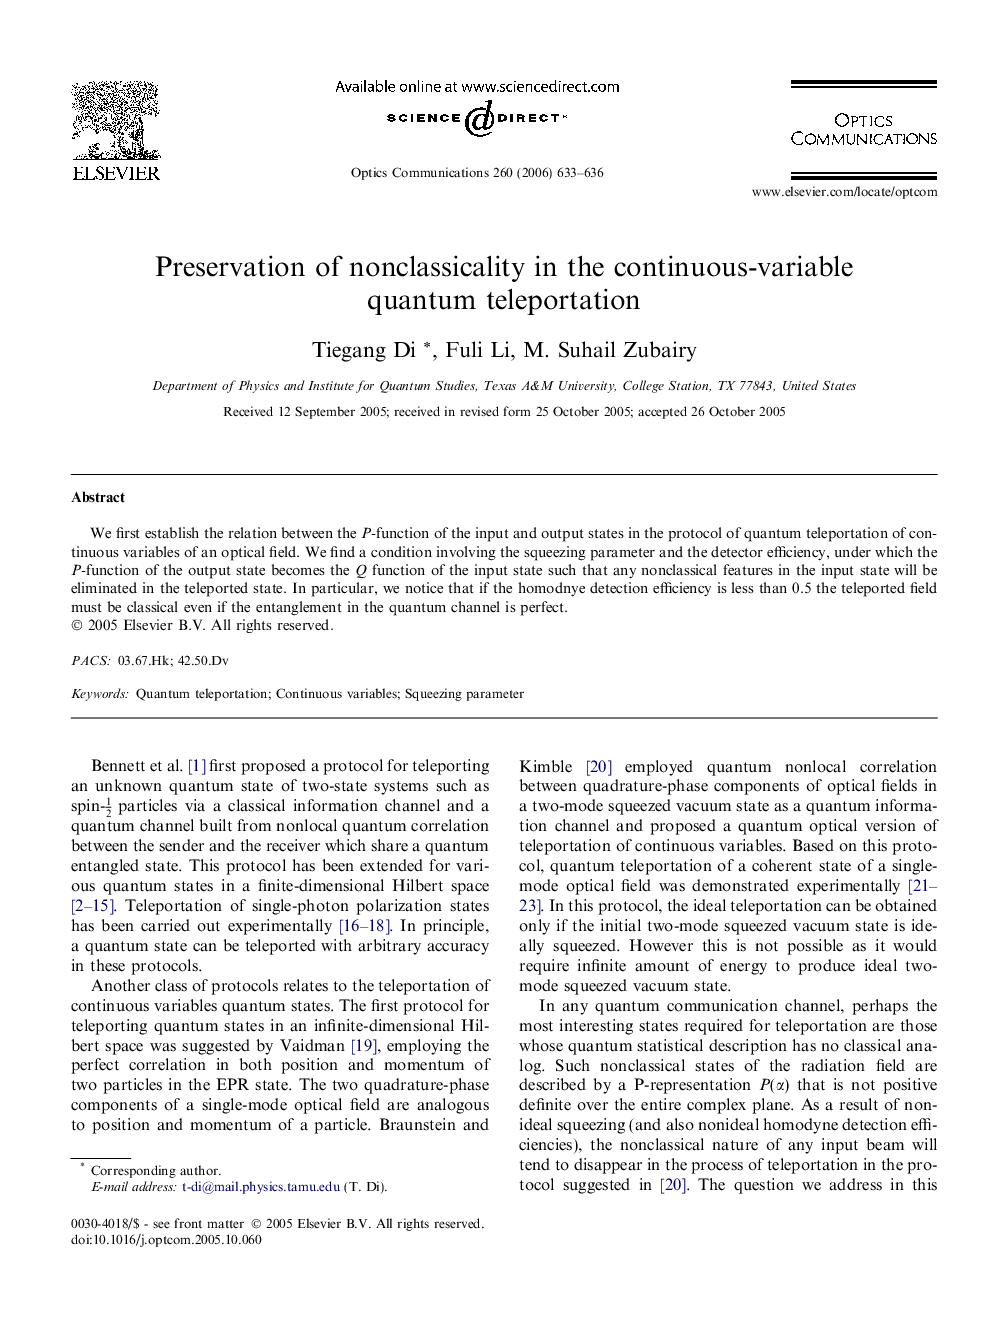 Preservation of nonclassicality in the continuous-variable quantum teleportation